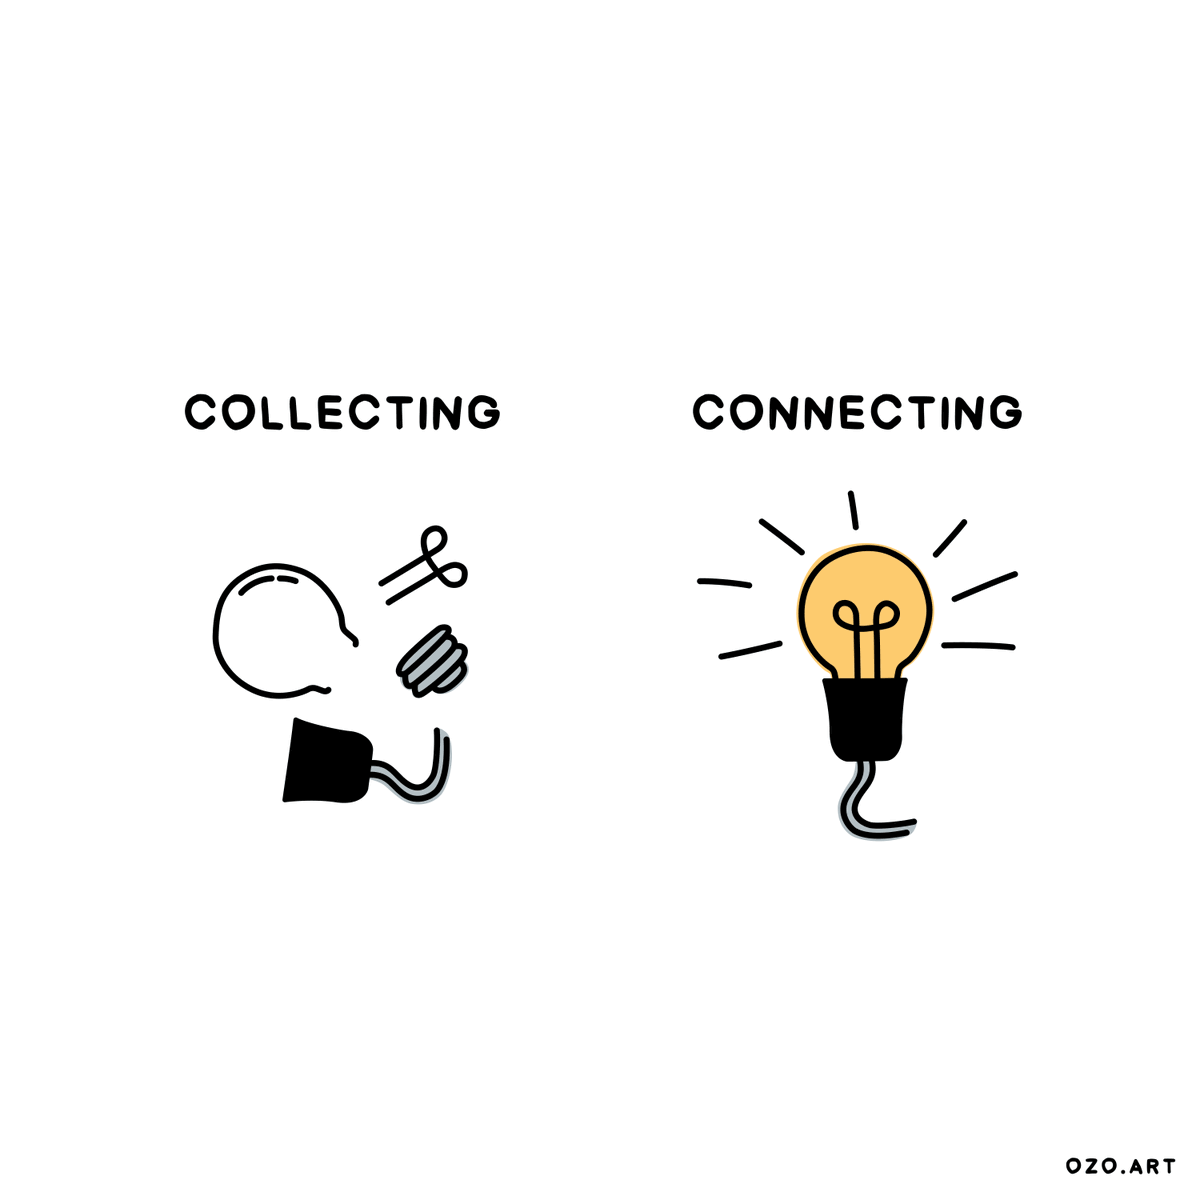 “Creativity is just connecting things.” – Steve Jobs